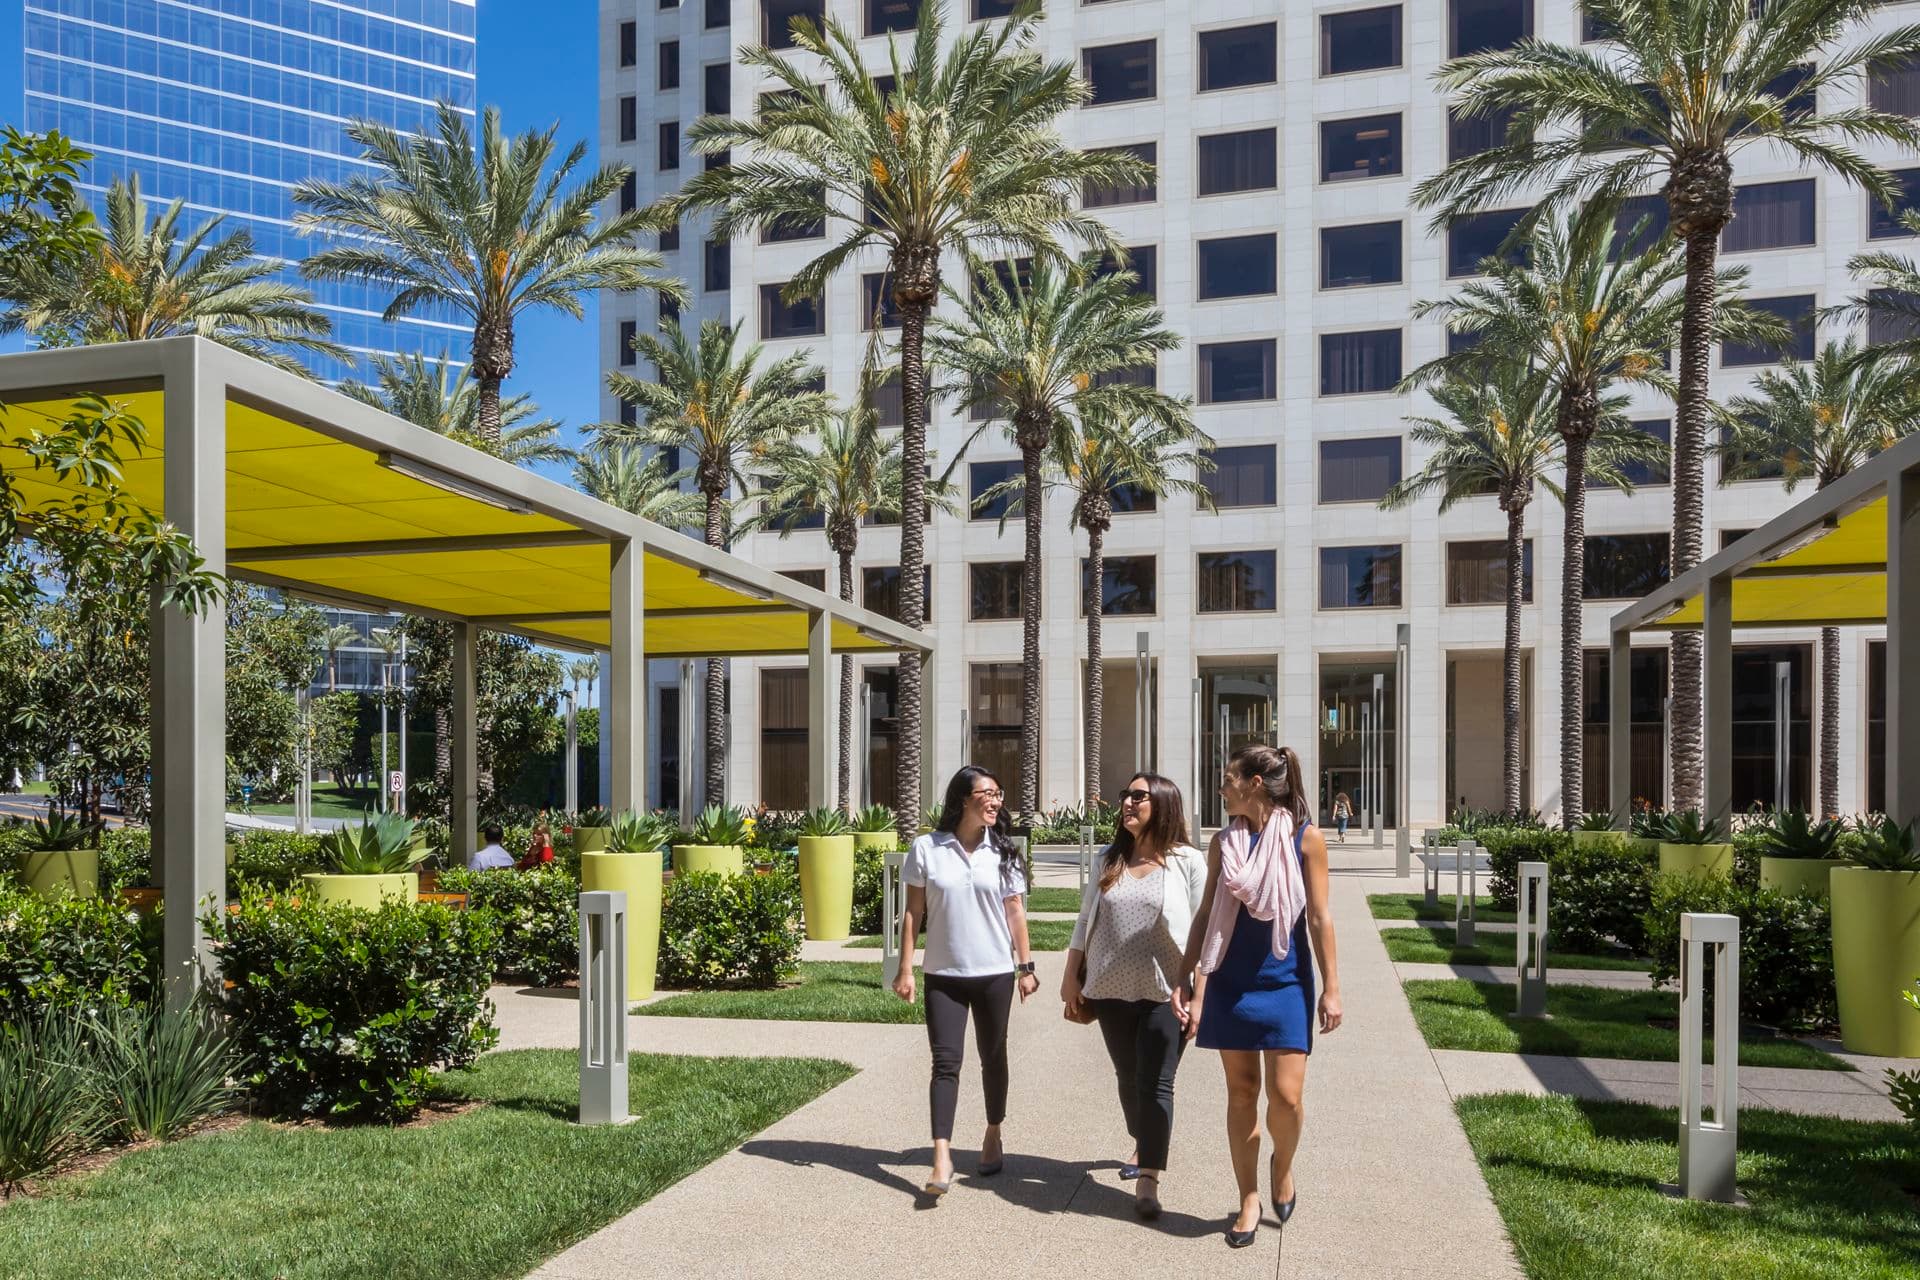 Photography of outdoor workspace near parking structure at 300 Spectrum Center Drive, Irvine, ca